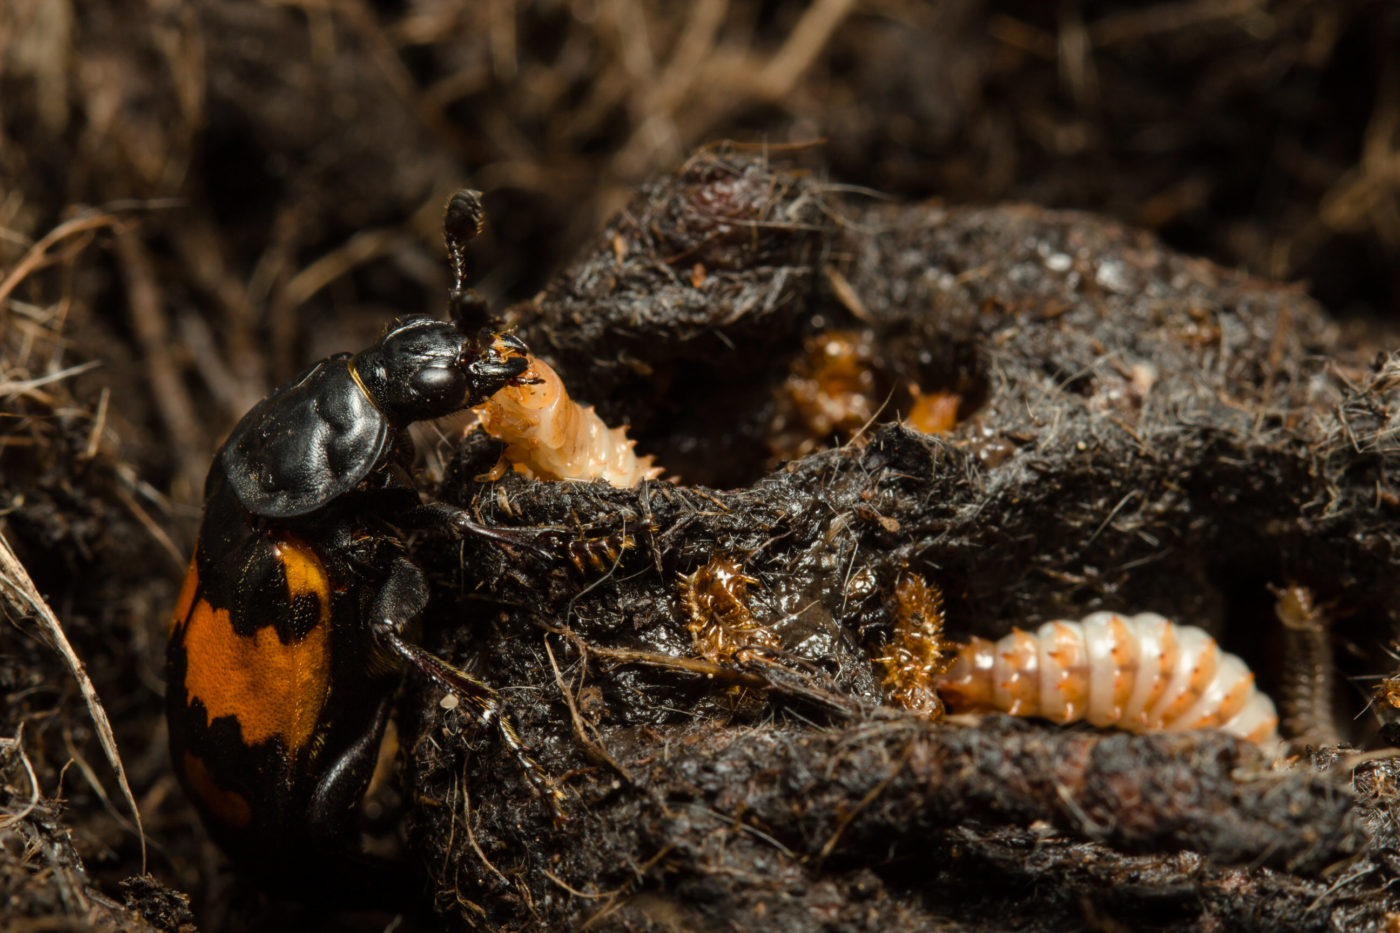 A female burying beetle, Nicrophorus vespilloides, feeds pre-digested meat to one of her larvae.